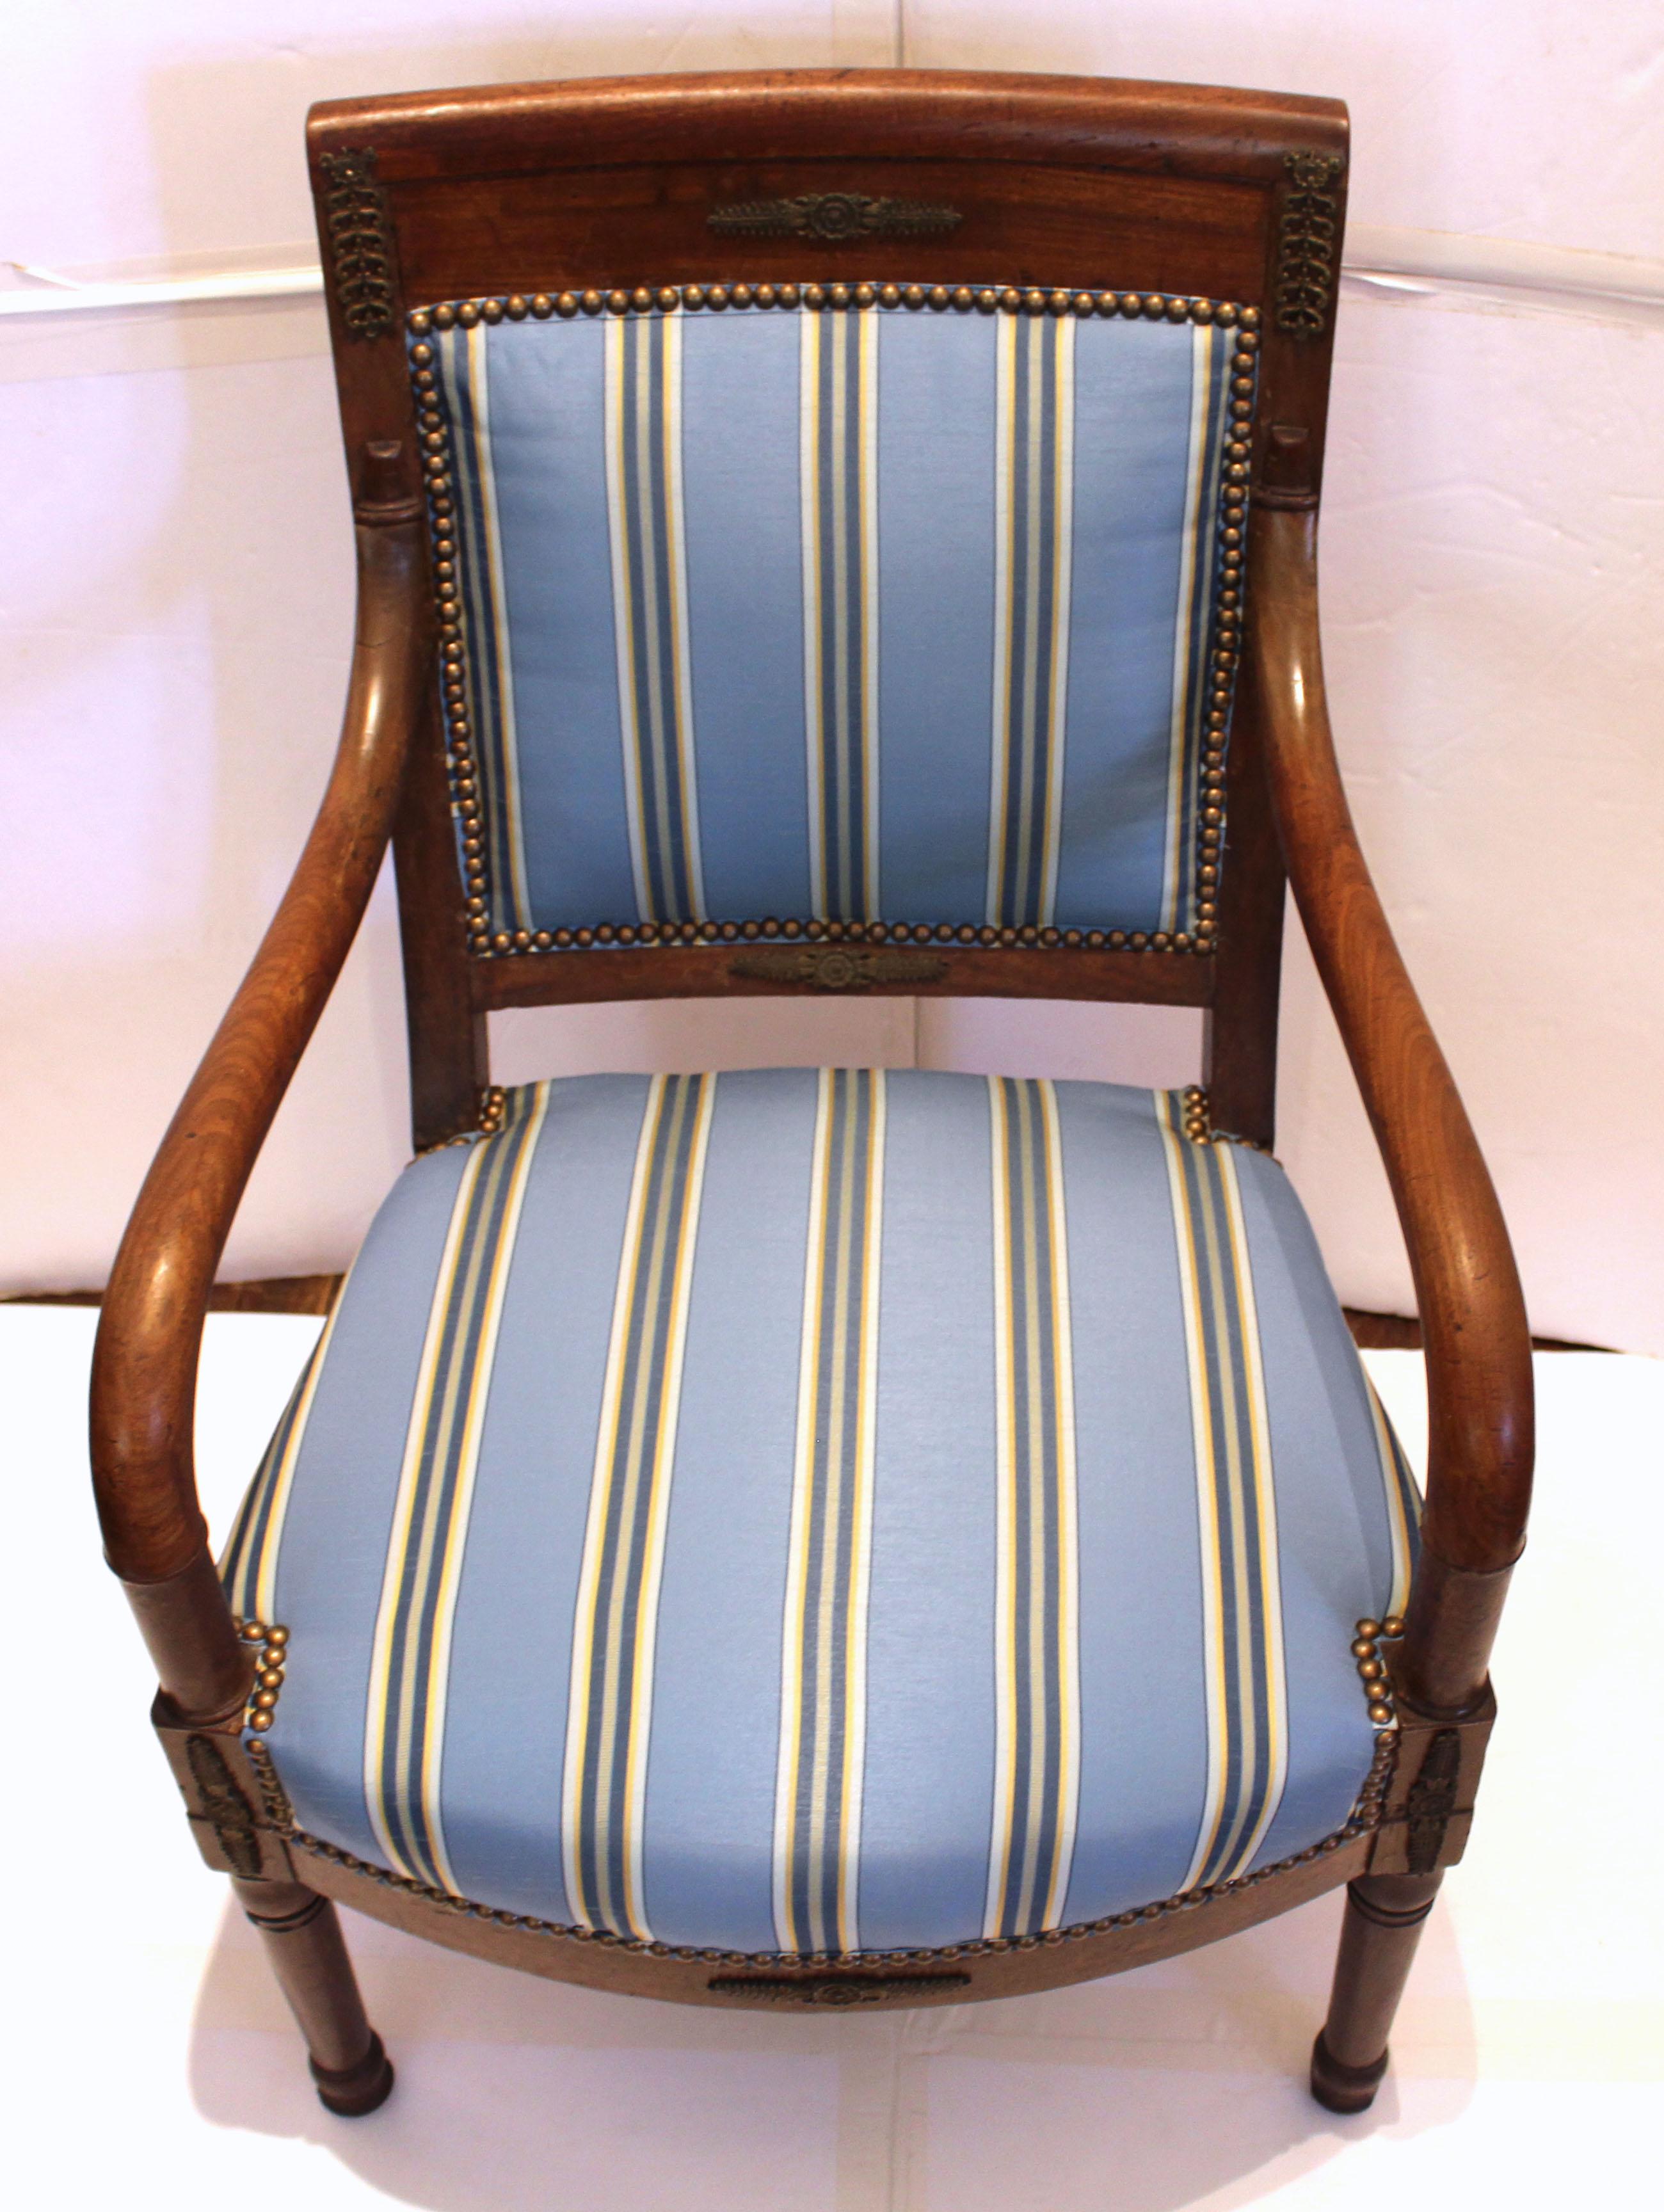 Empire Circa 1800-1815 Pair of Fauteuils or Open Arm Chairs, French